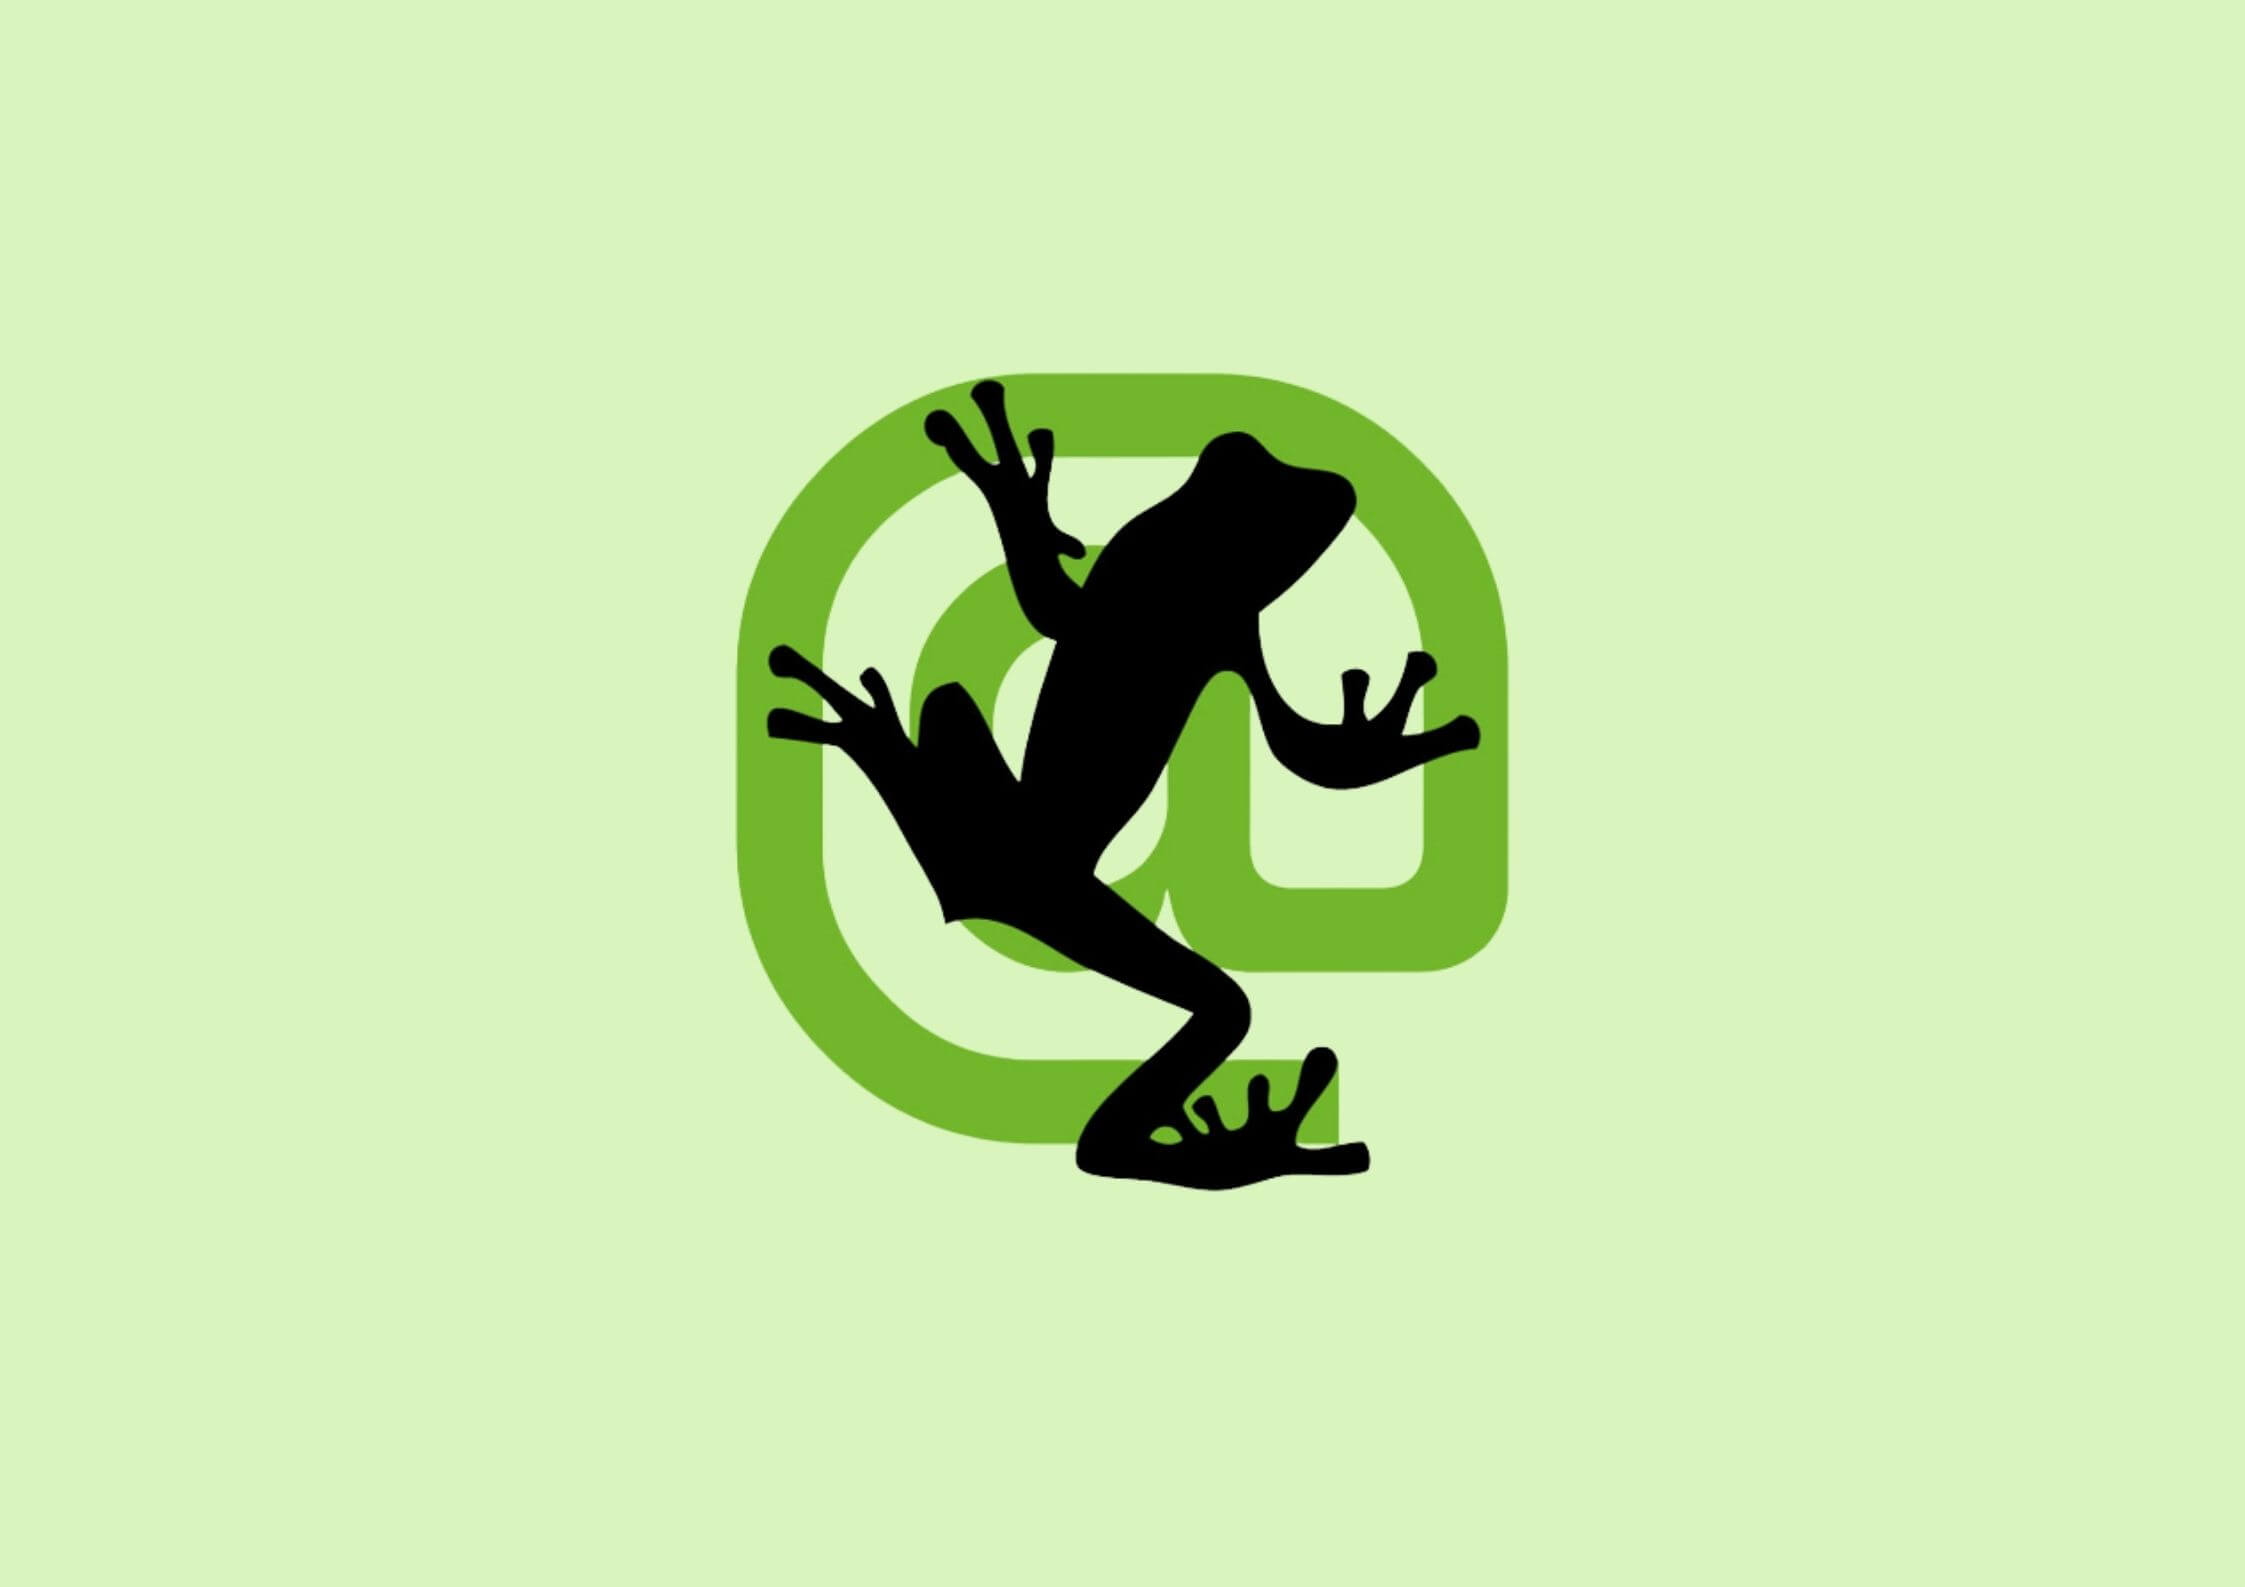 How To Analyze SEO With Screaming Frog?